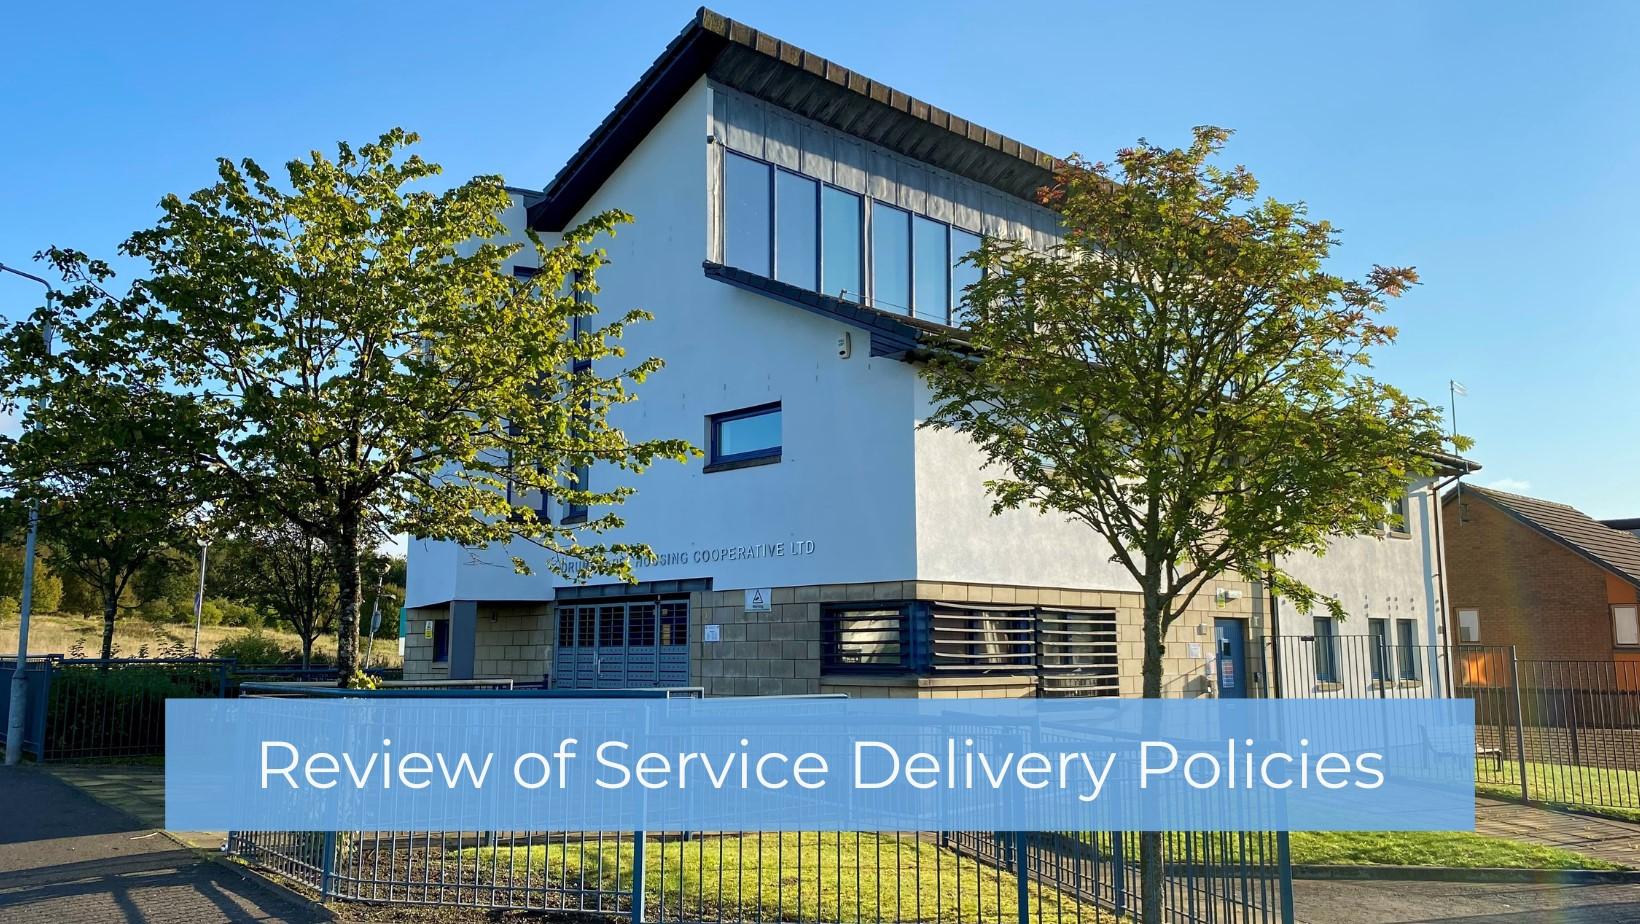 Review of Service Delivery Policies